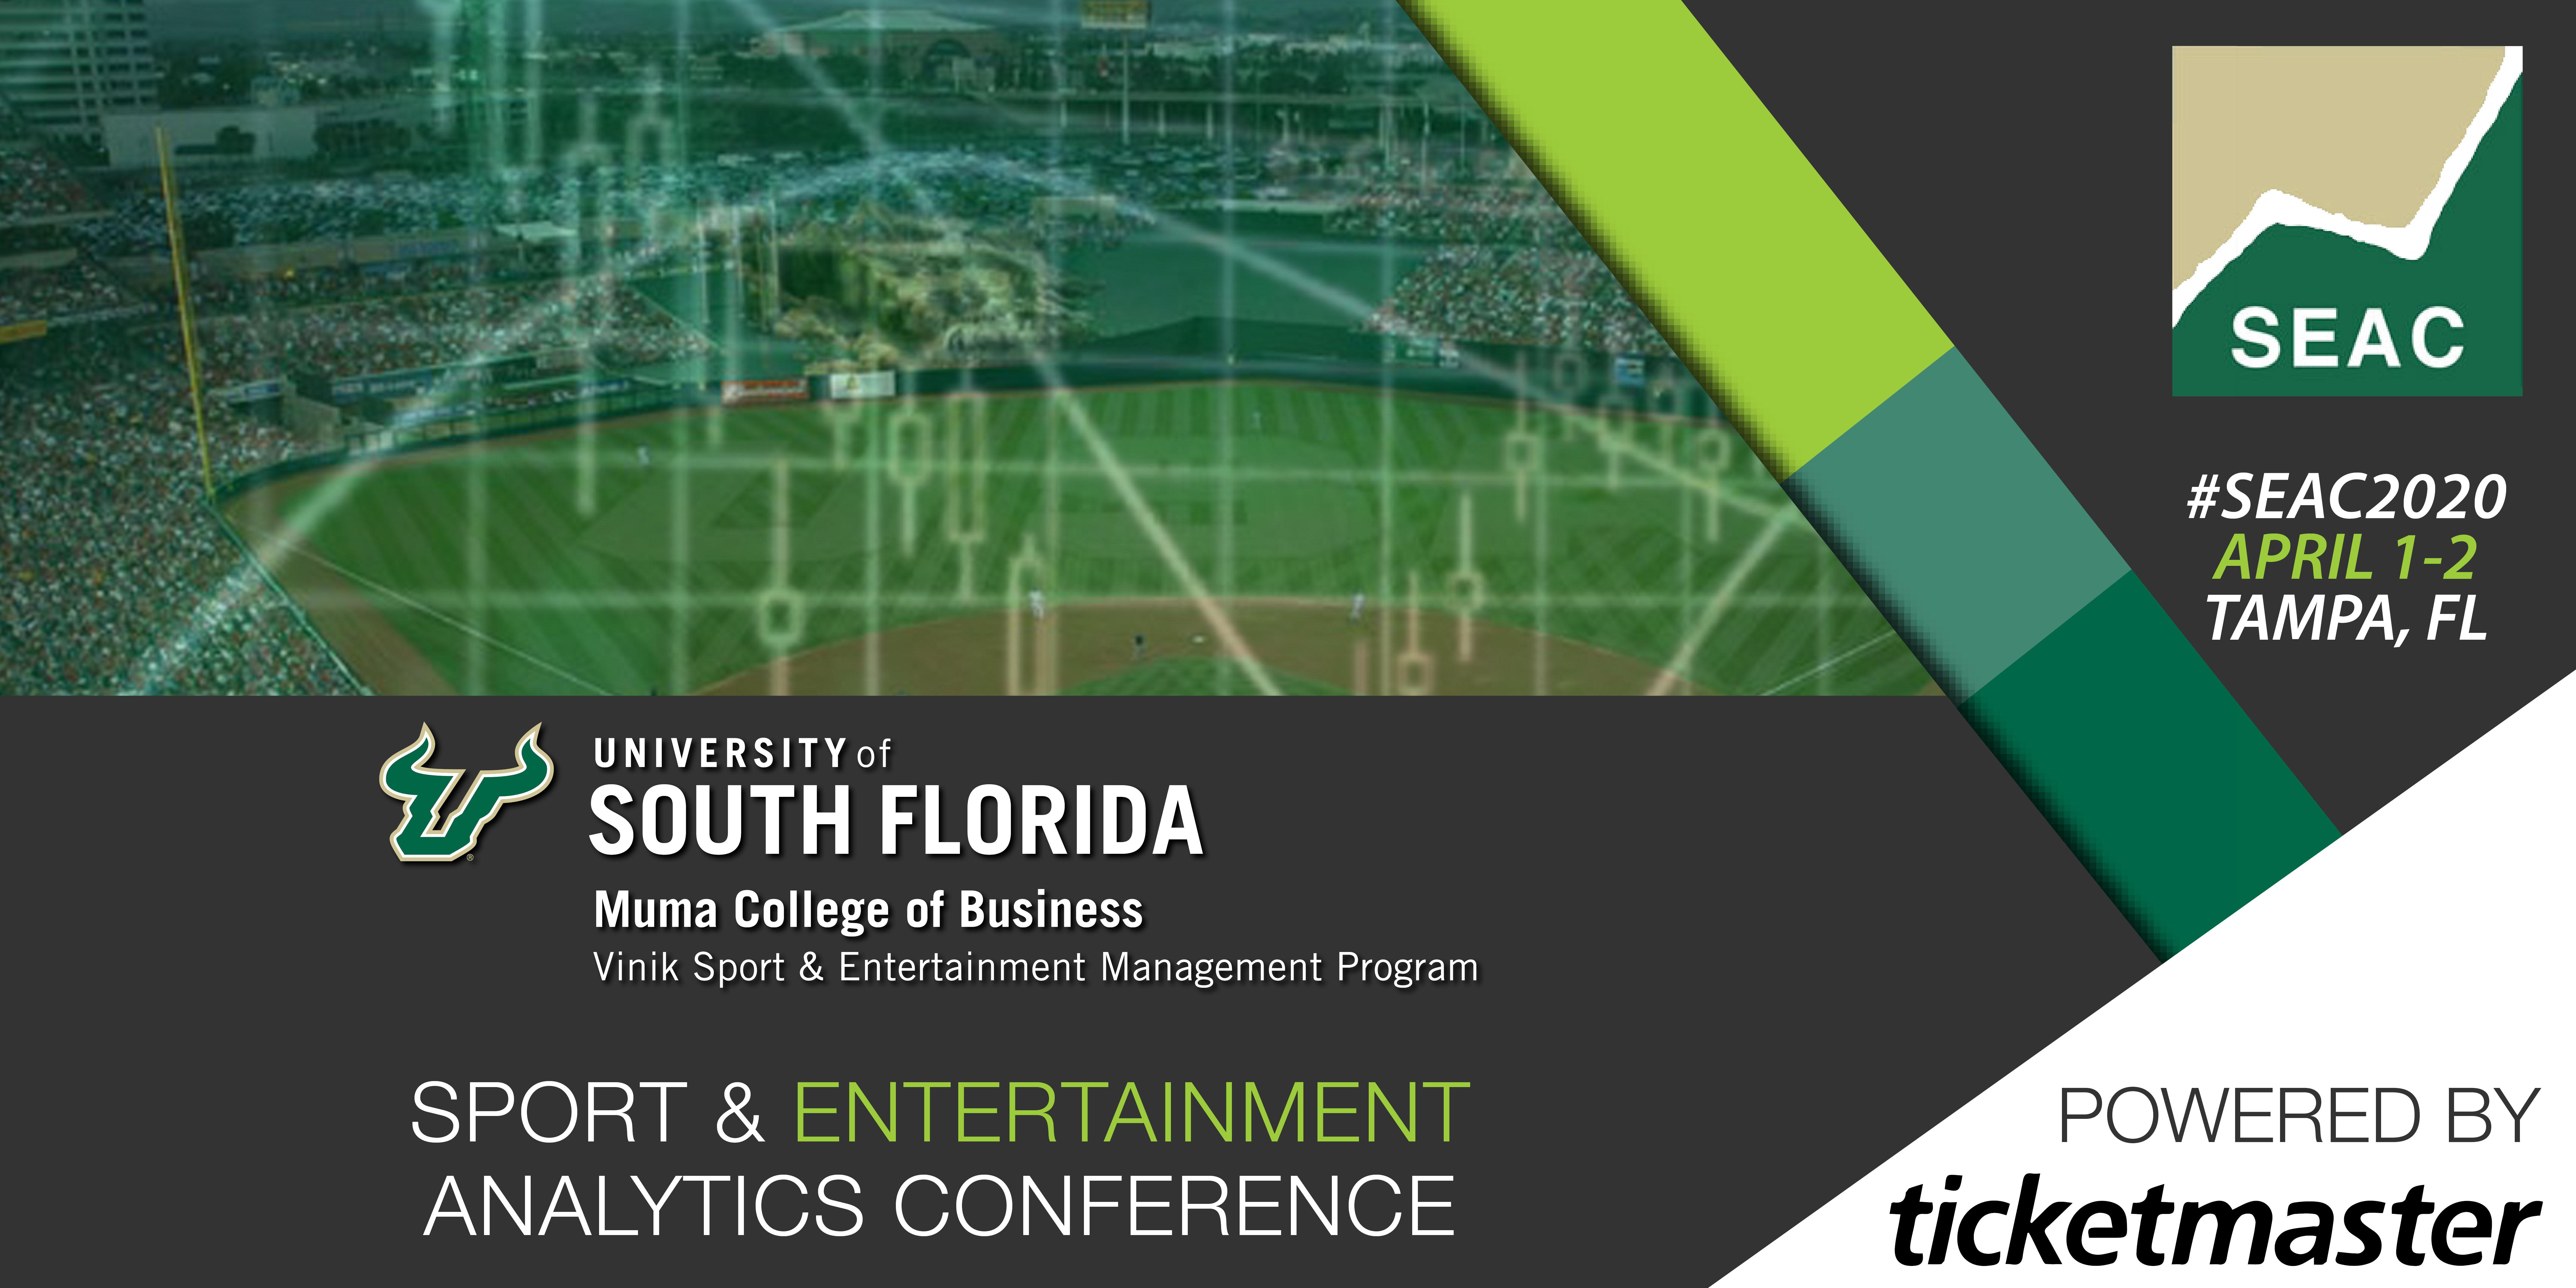 University of South Florida Sport & Entertainment Analytics Conference 2020